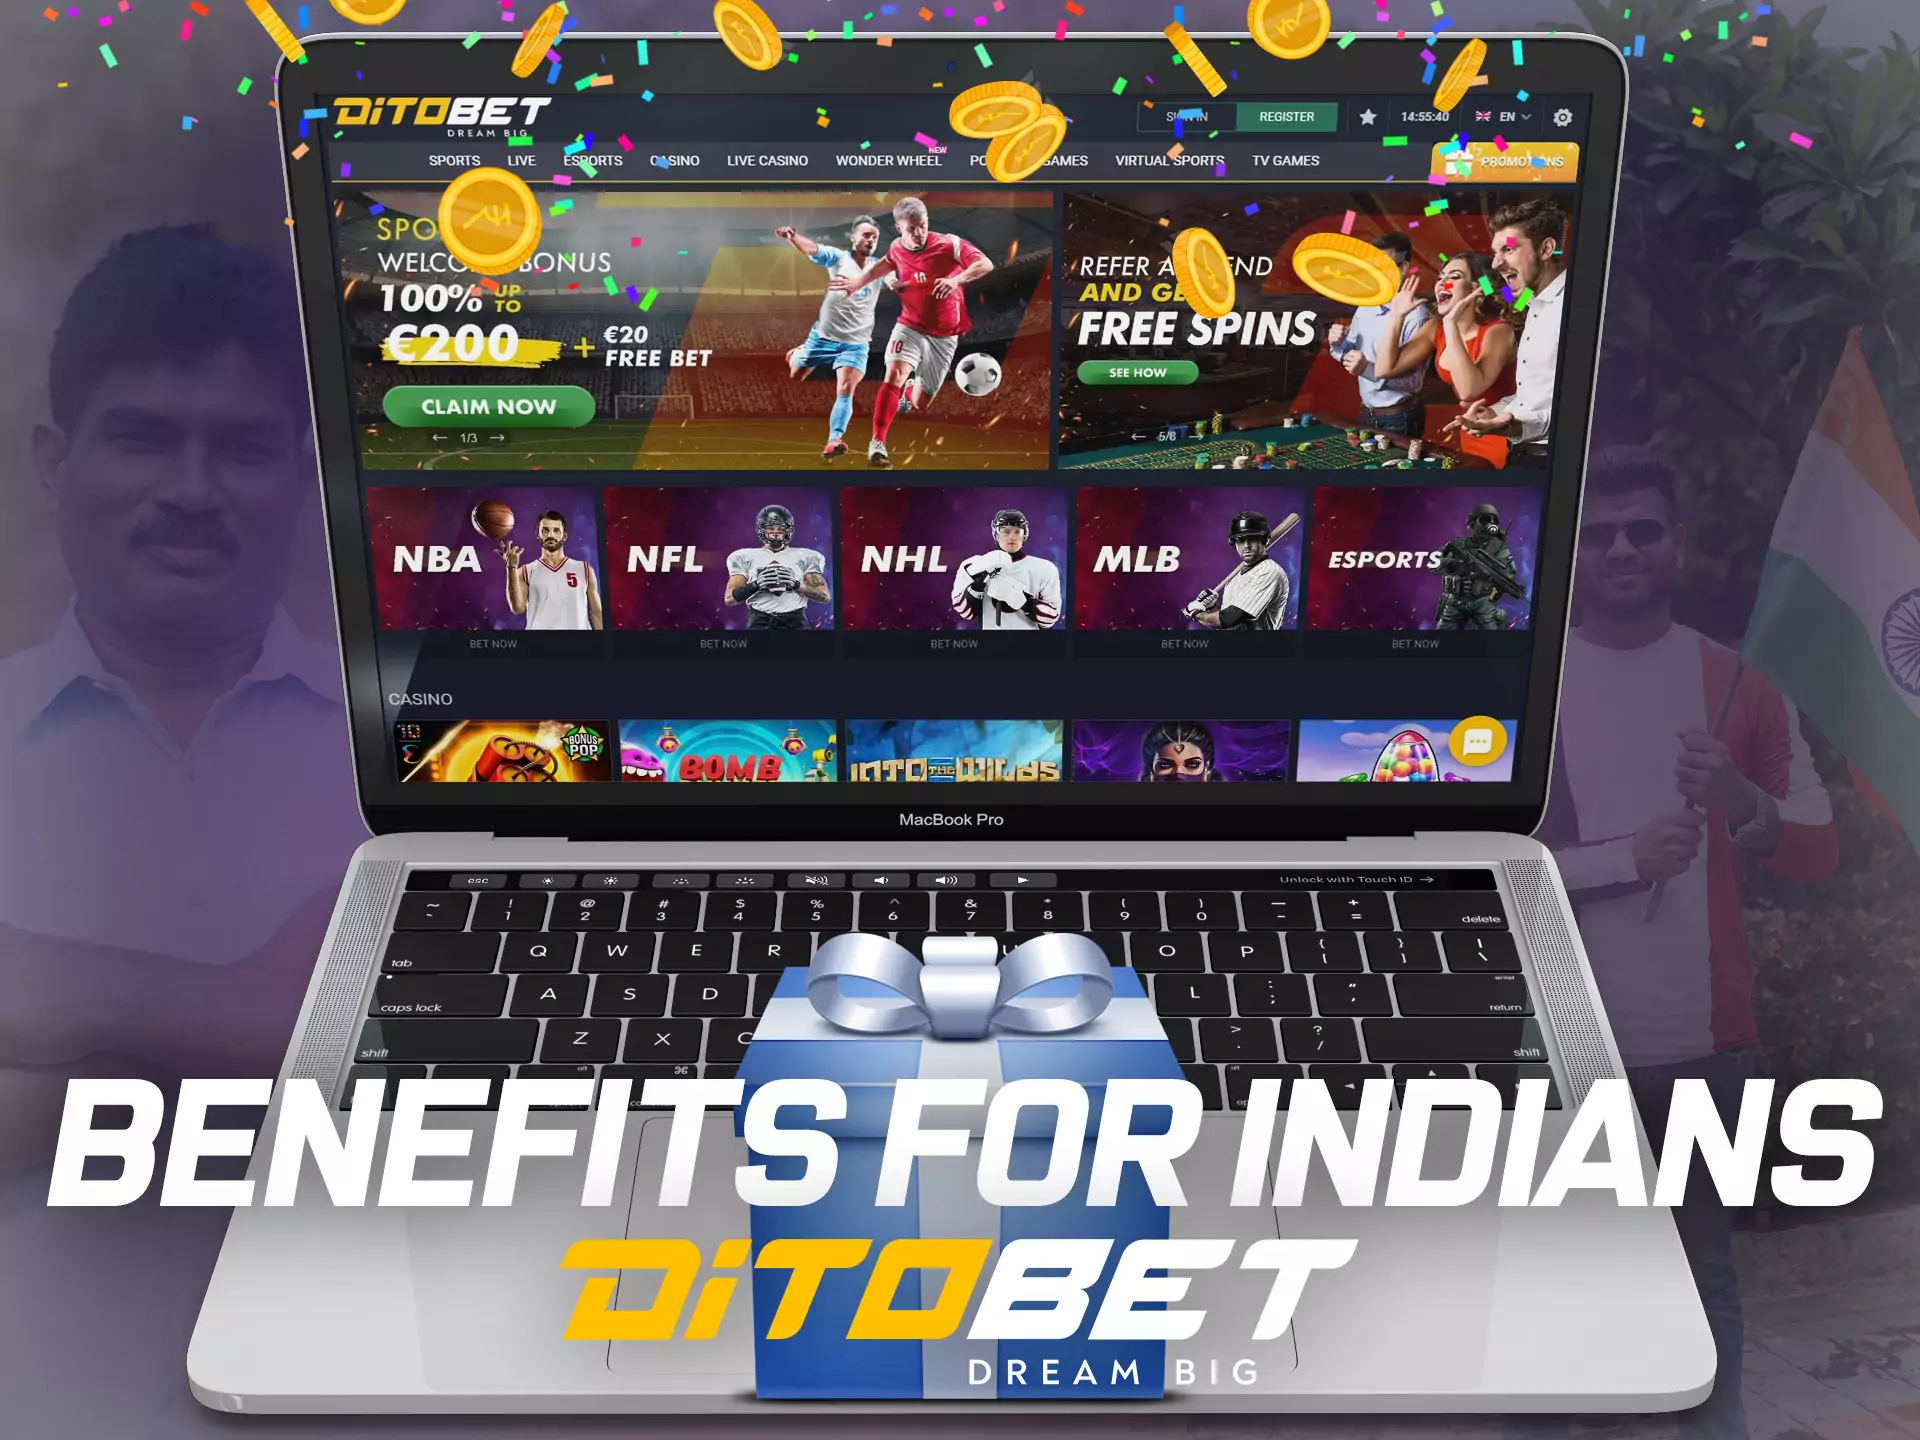 Ditobet offers many benefits and bonuses to players from India.